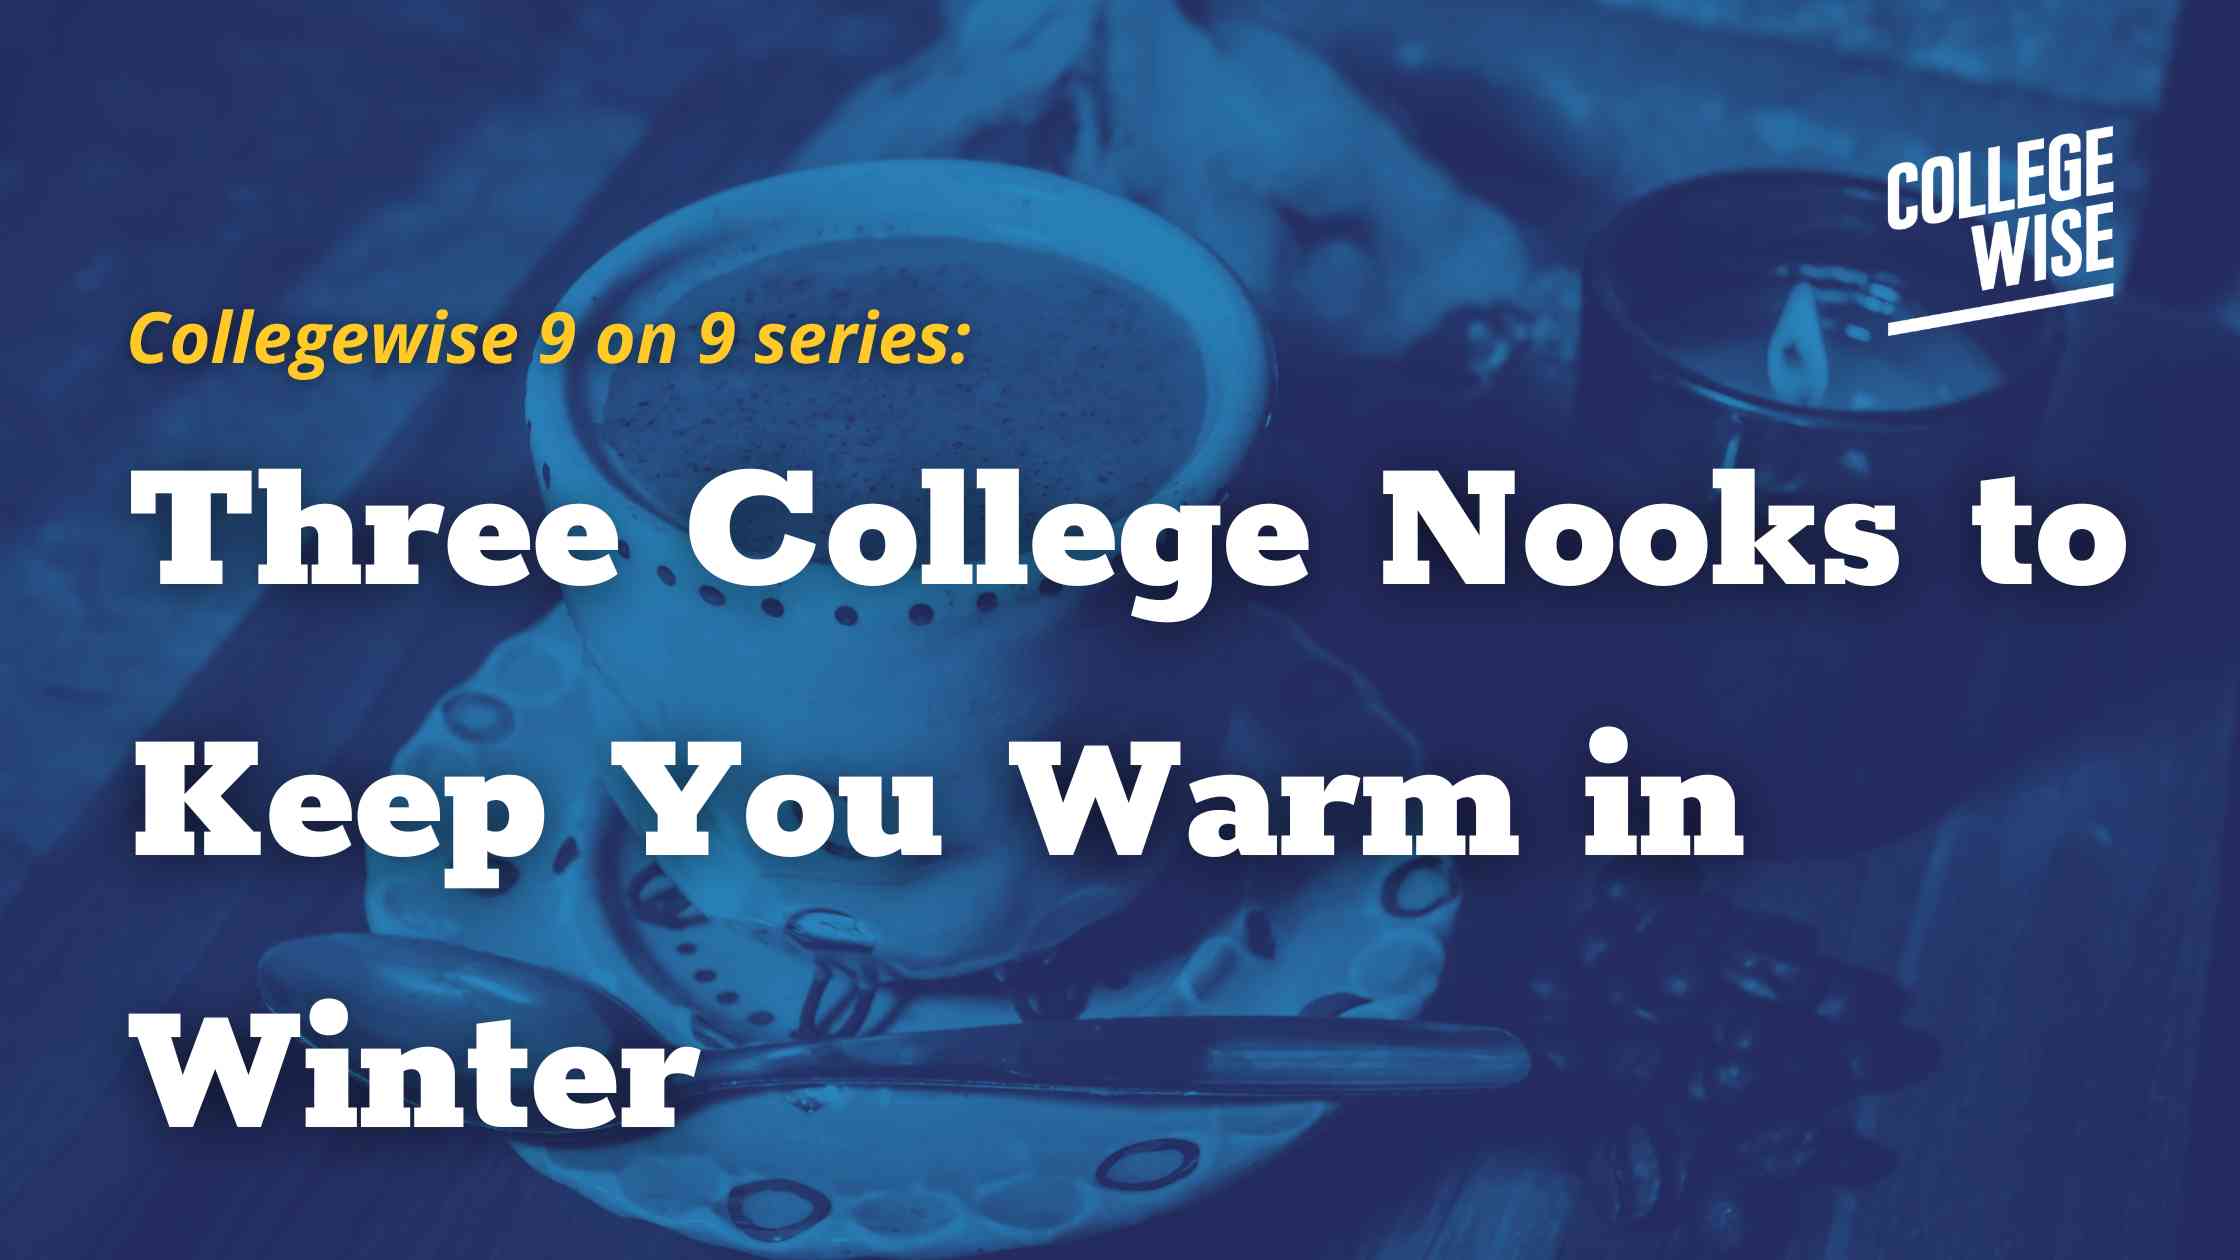 Three College Nooks to Keep You Warm in Winter